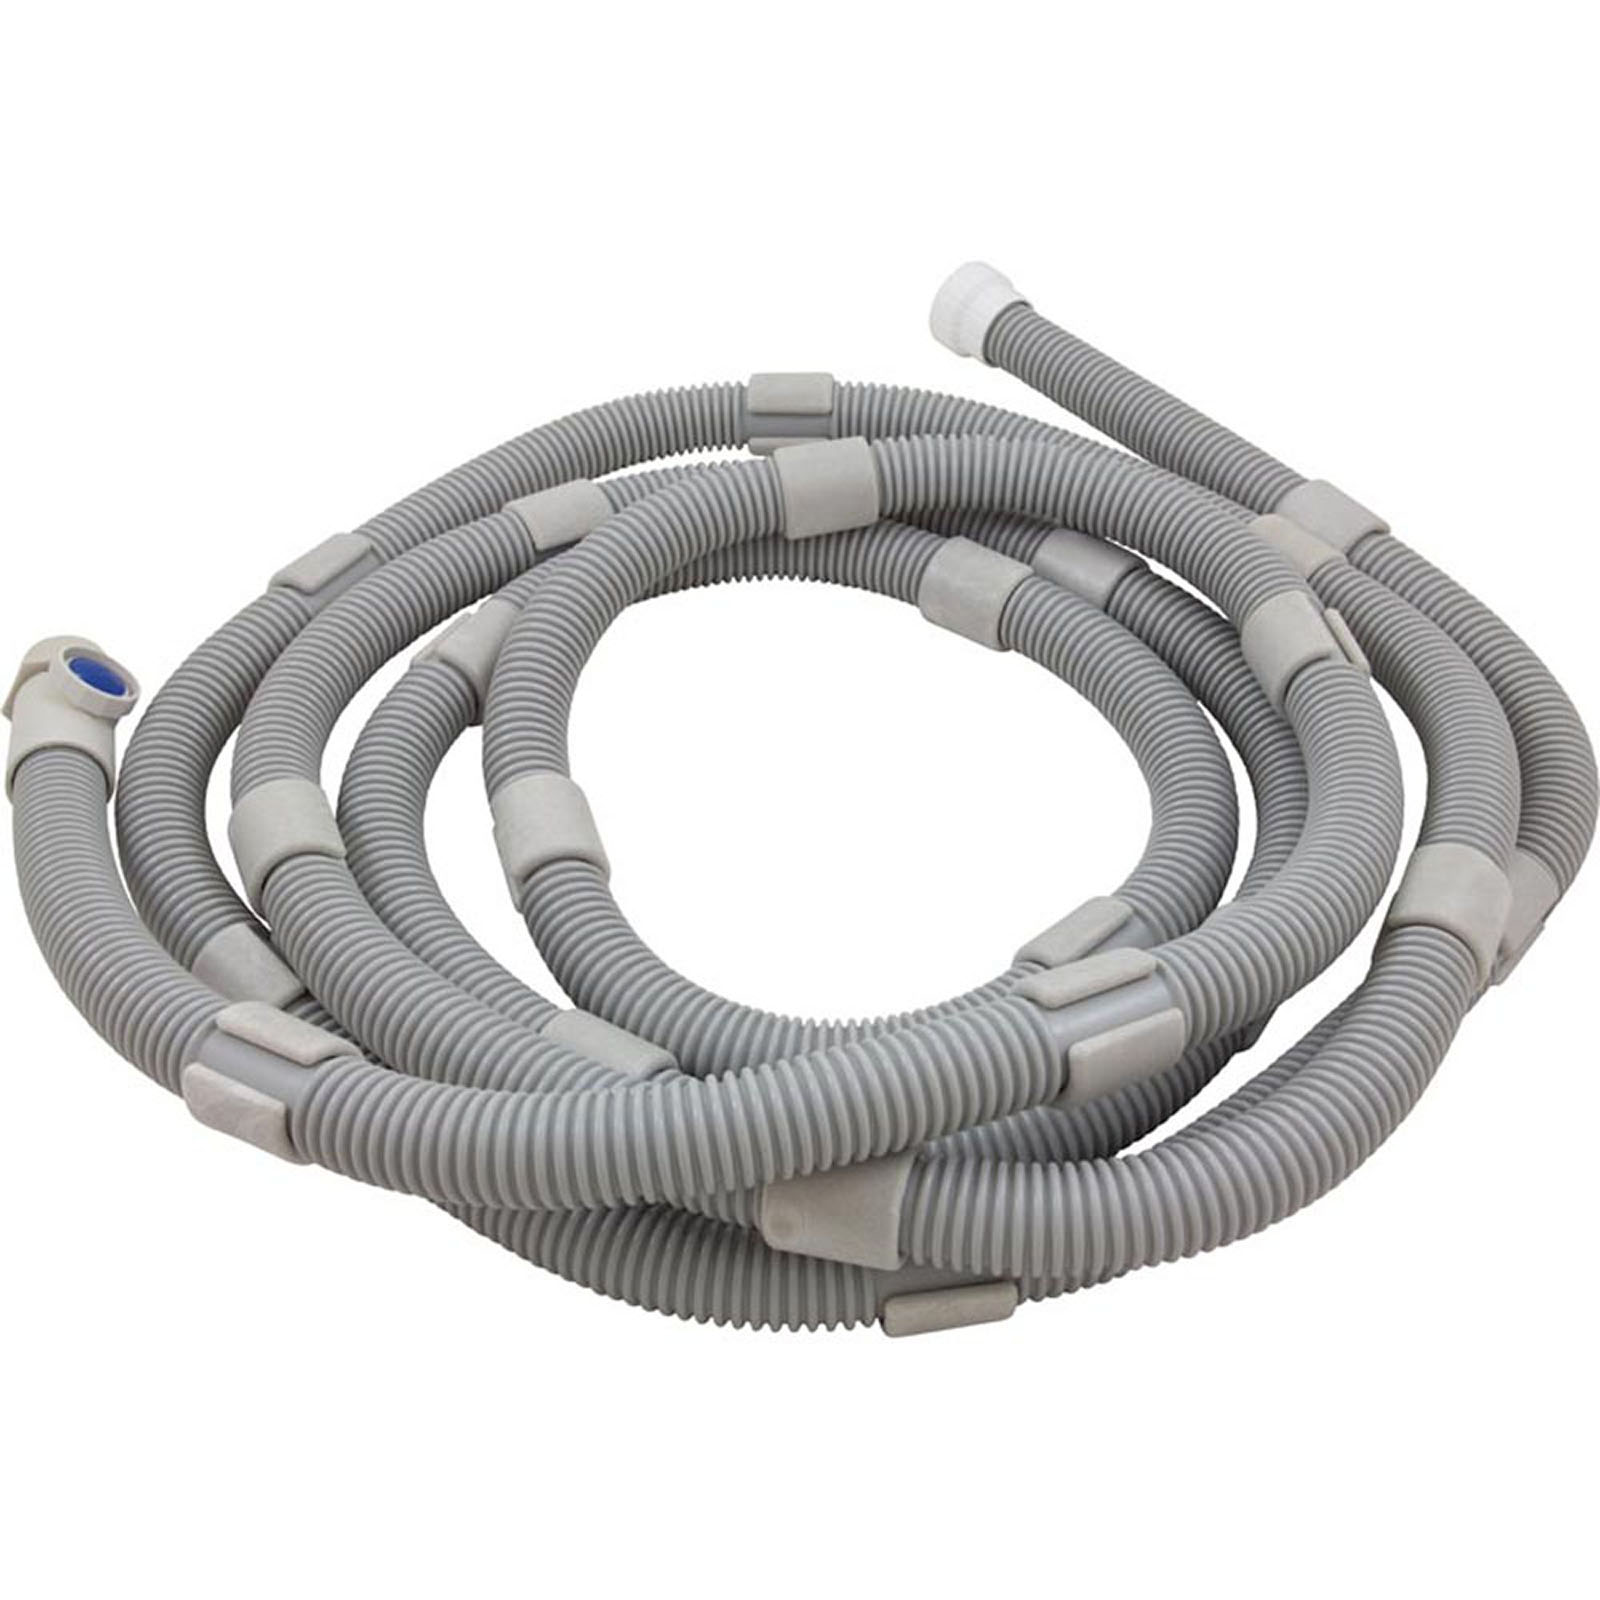 Zodiac Pool Solutions Float Hose Complete, 24 Ft.